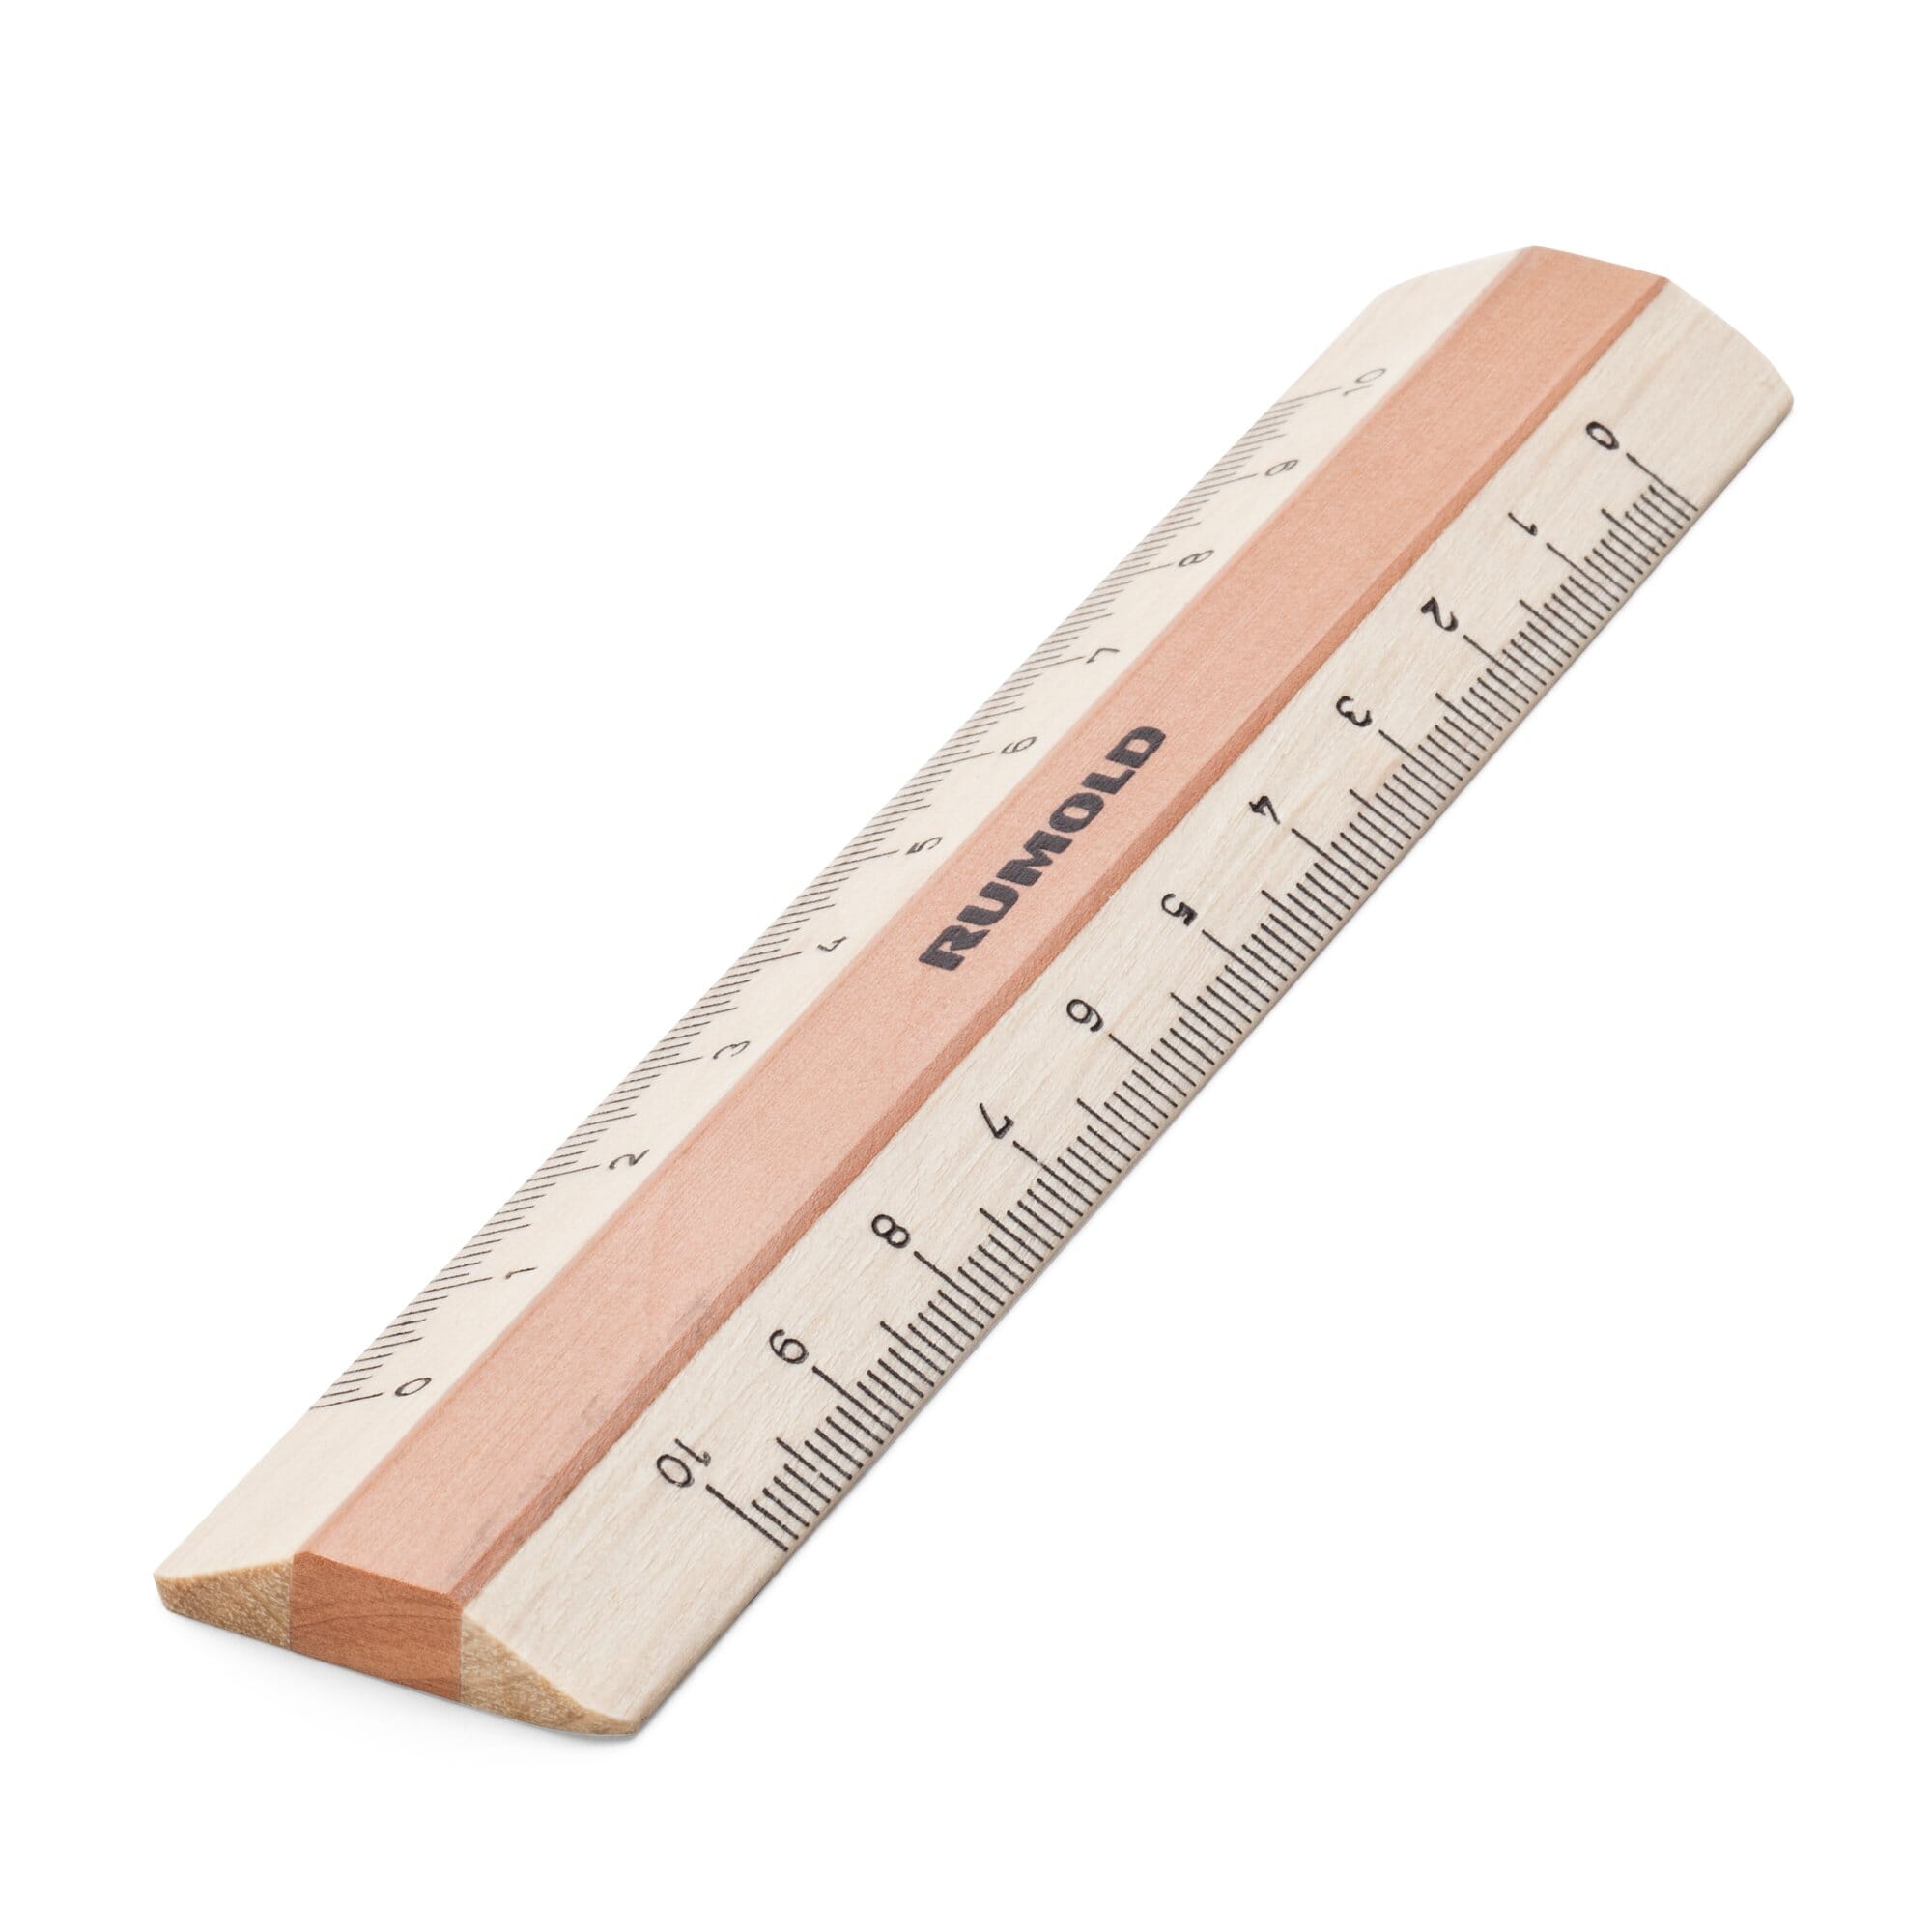 Hand-Dyed Turquoise + Gold Wooden Rulers